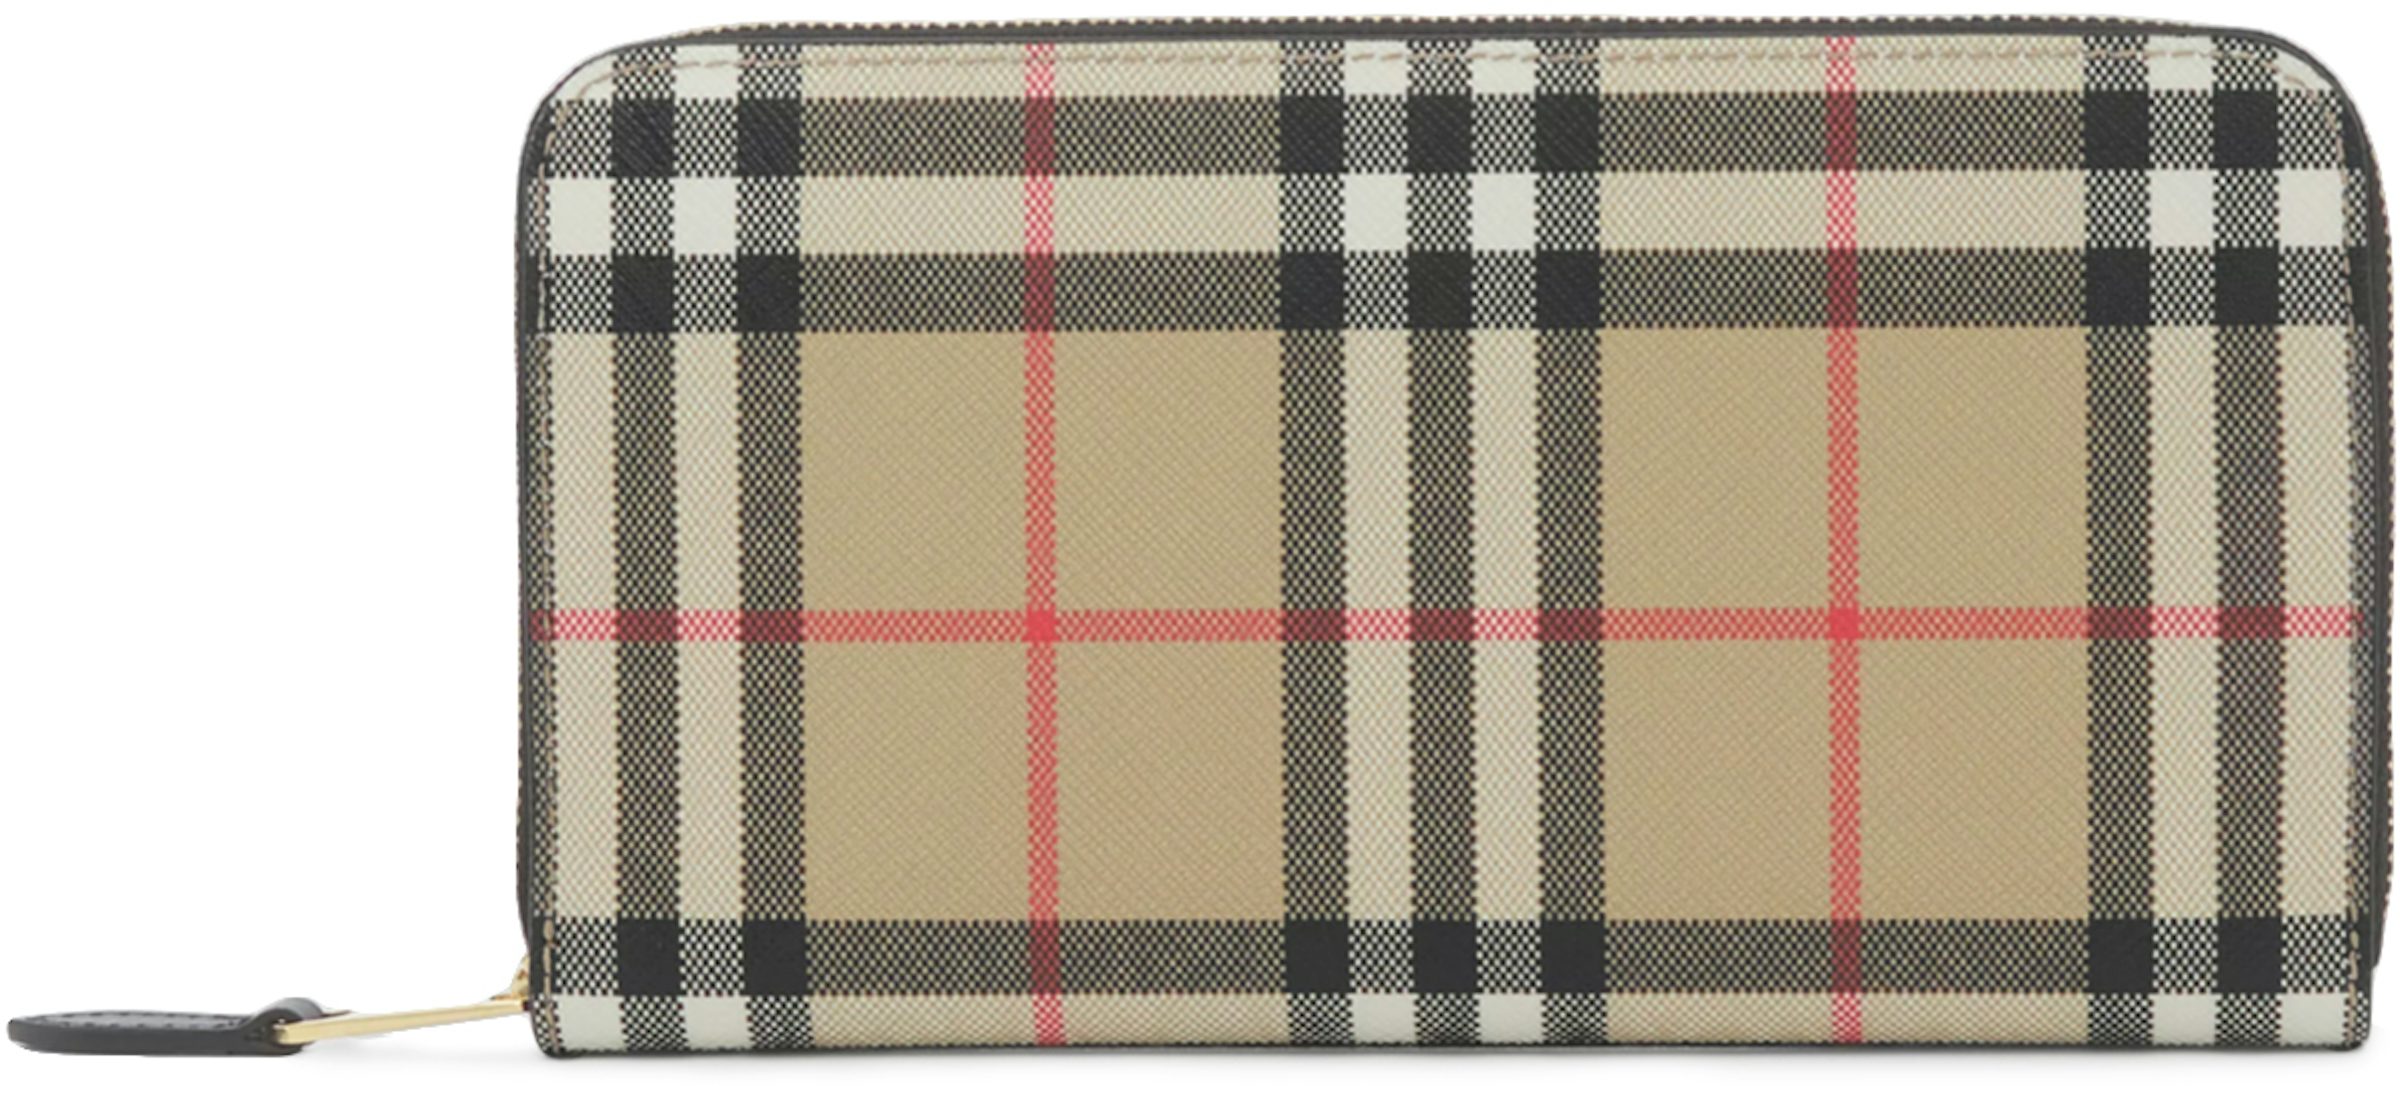 Women's Check Coin Pouch by Burberry